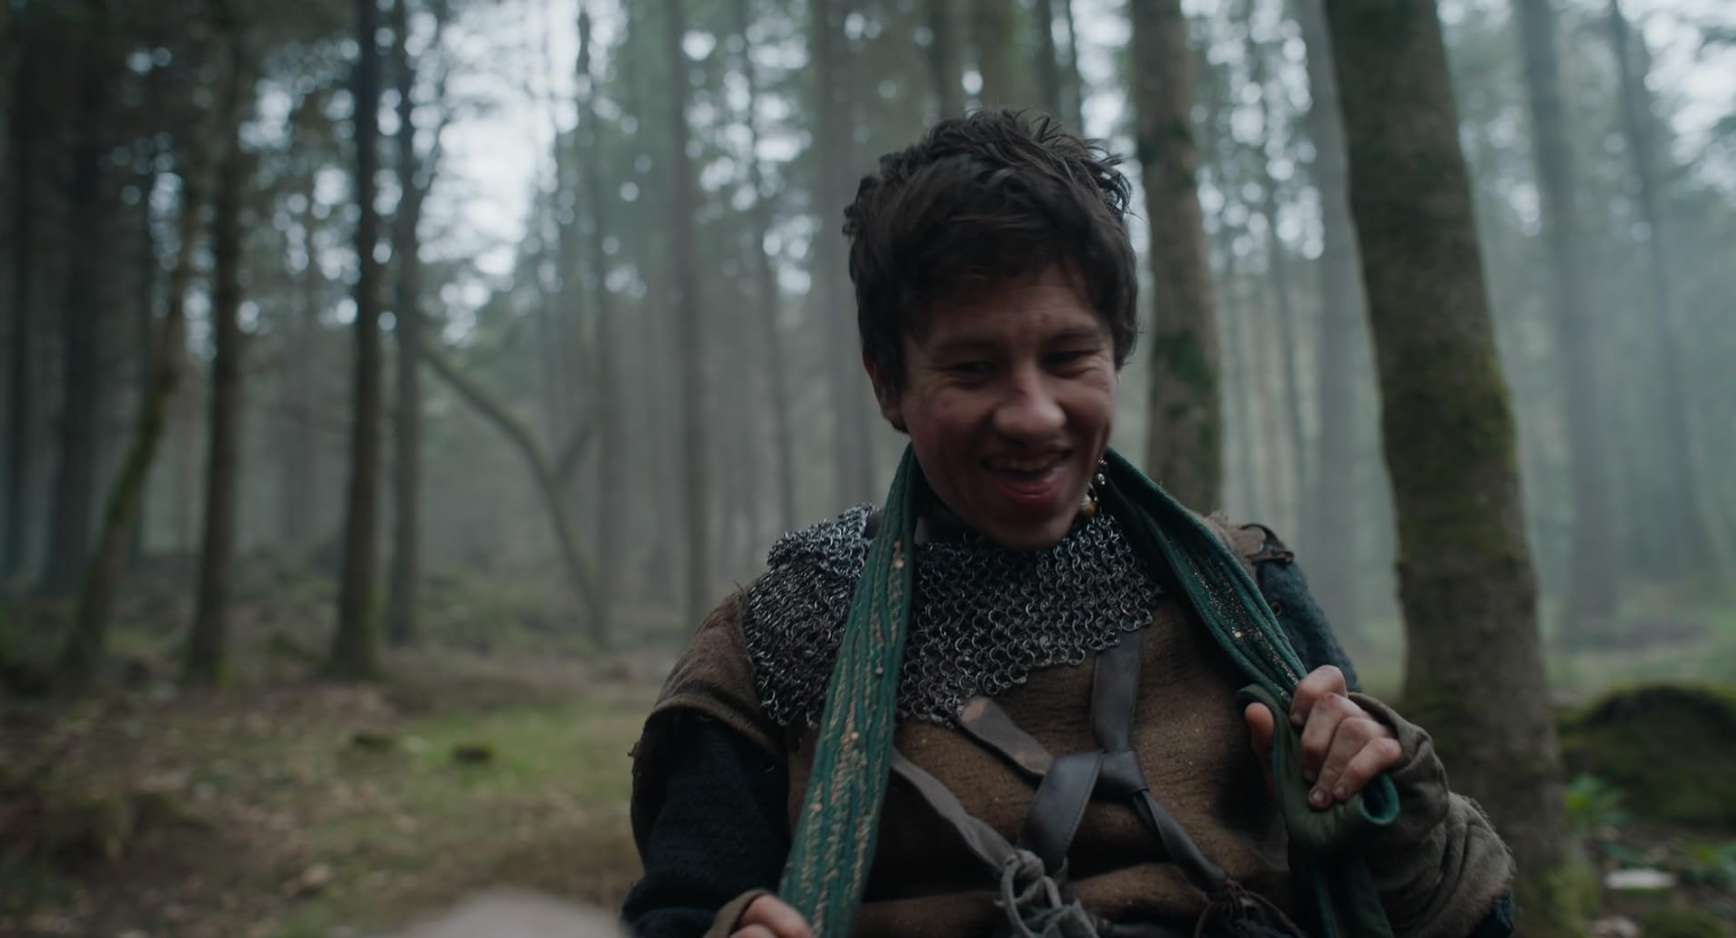 A man in chainmail sneers in the woods in this image from A24.